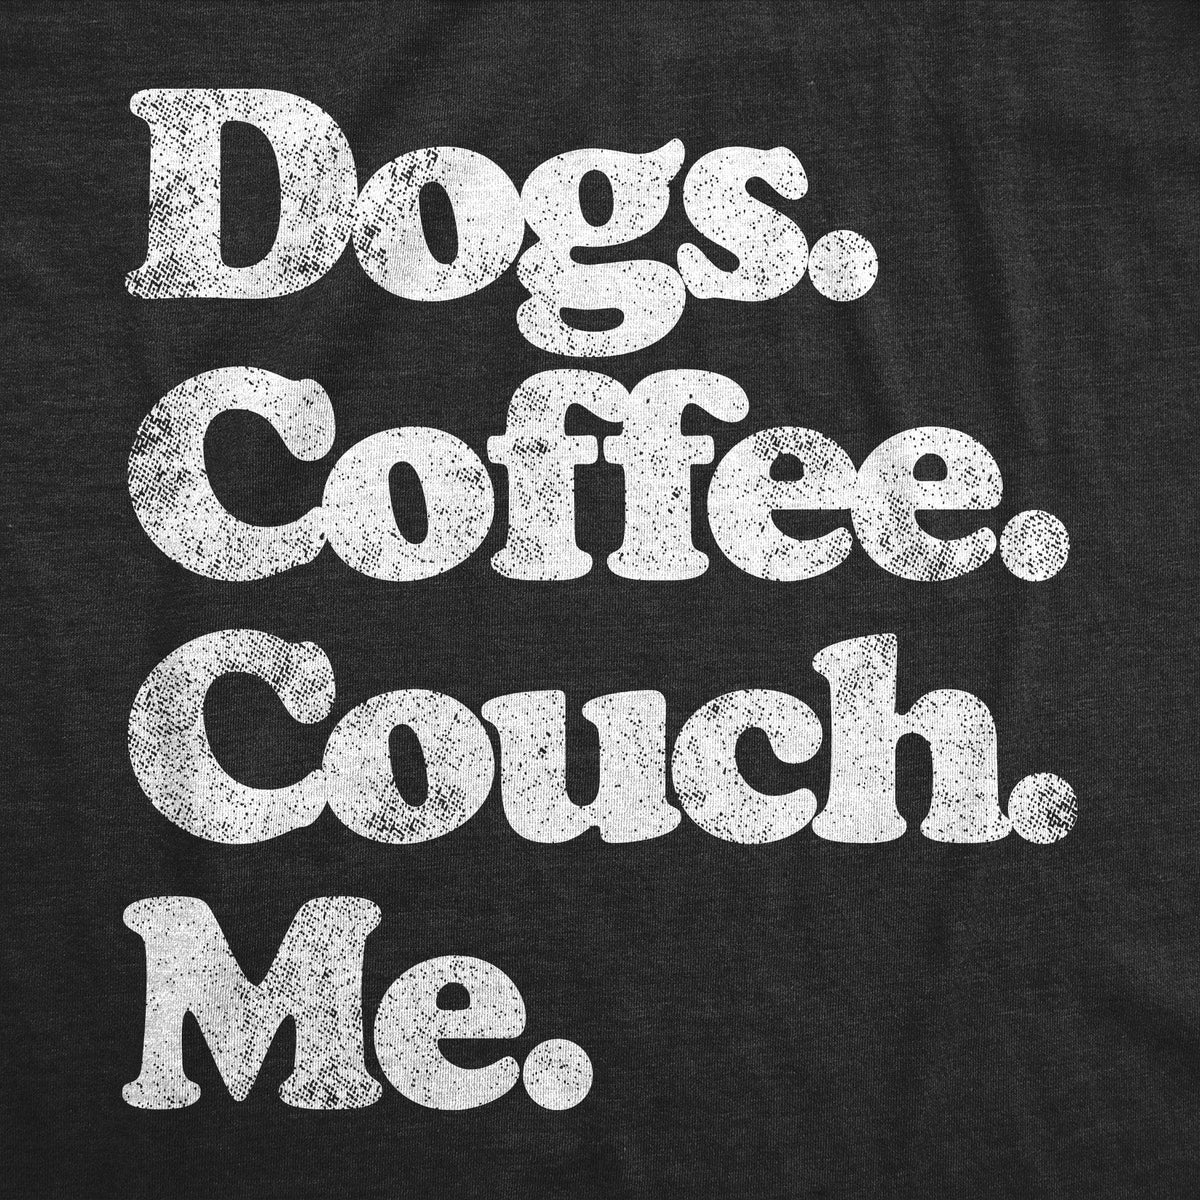 Dogs Coffee Couch Me Women&#39;s Tshirt  -  Crazy Dog T-Shirts